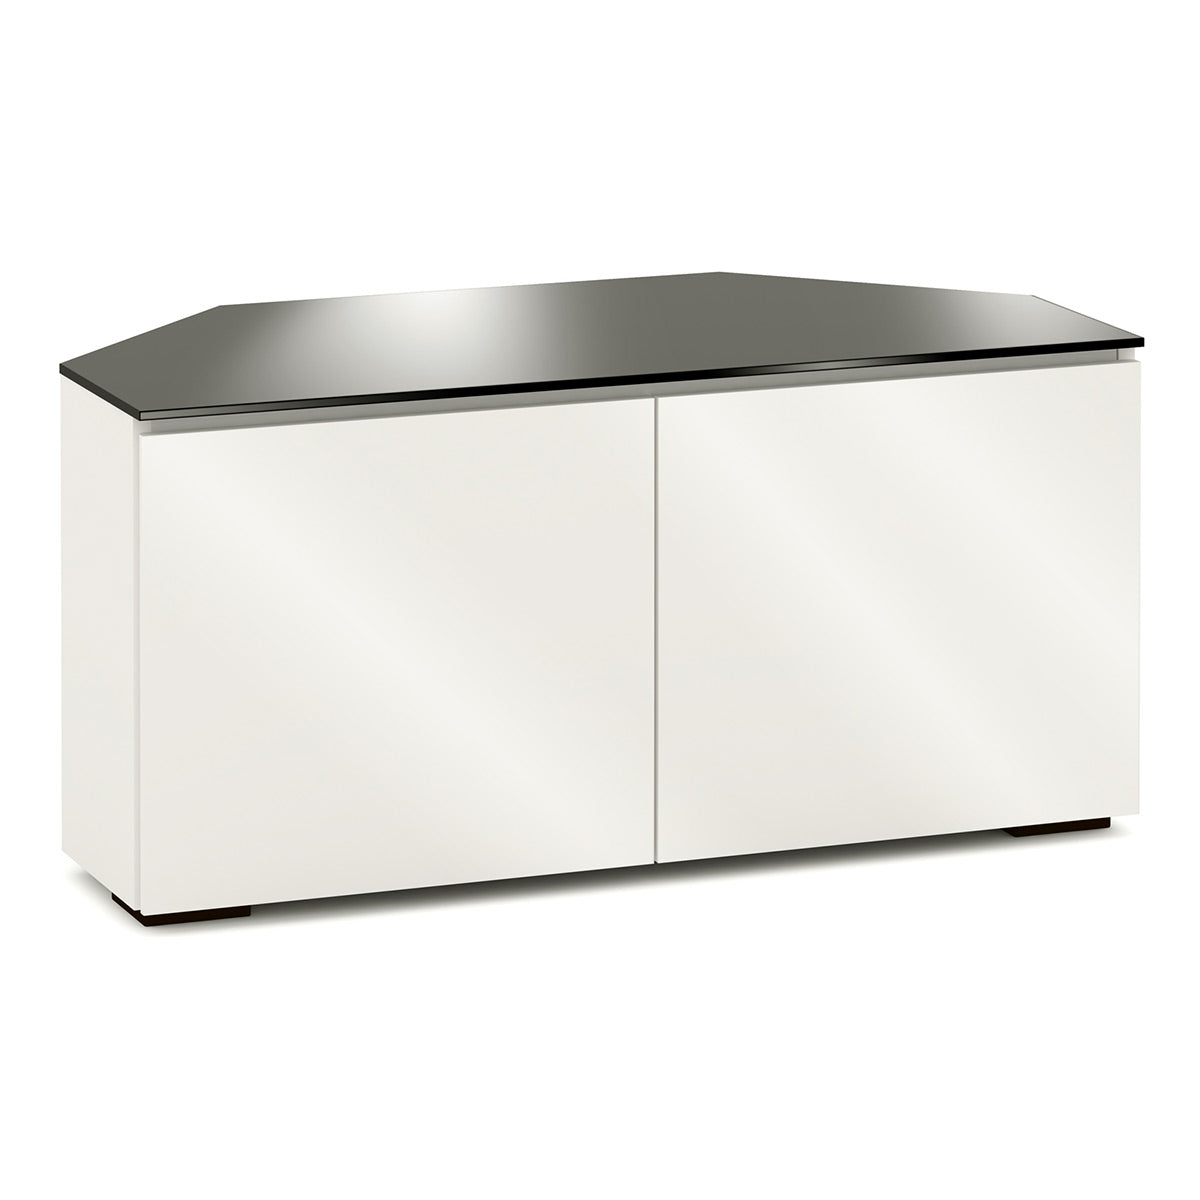 Salamander Chameleon Collection Miami 221 Twin Corner AV Cabinet (High Gloss White with Black Glass Top)